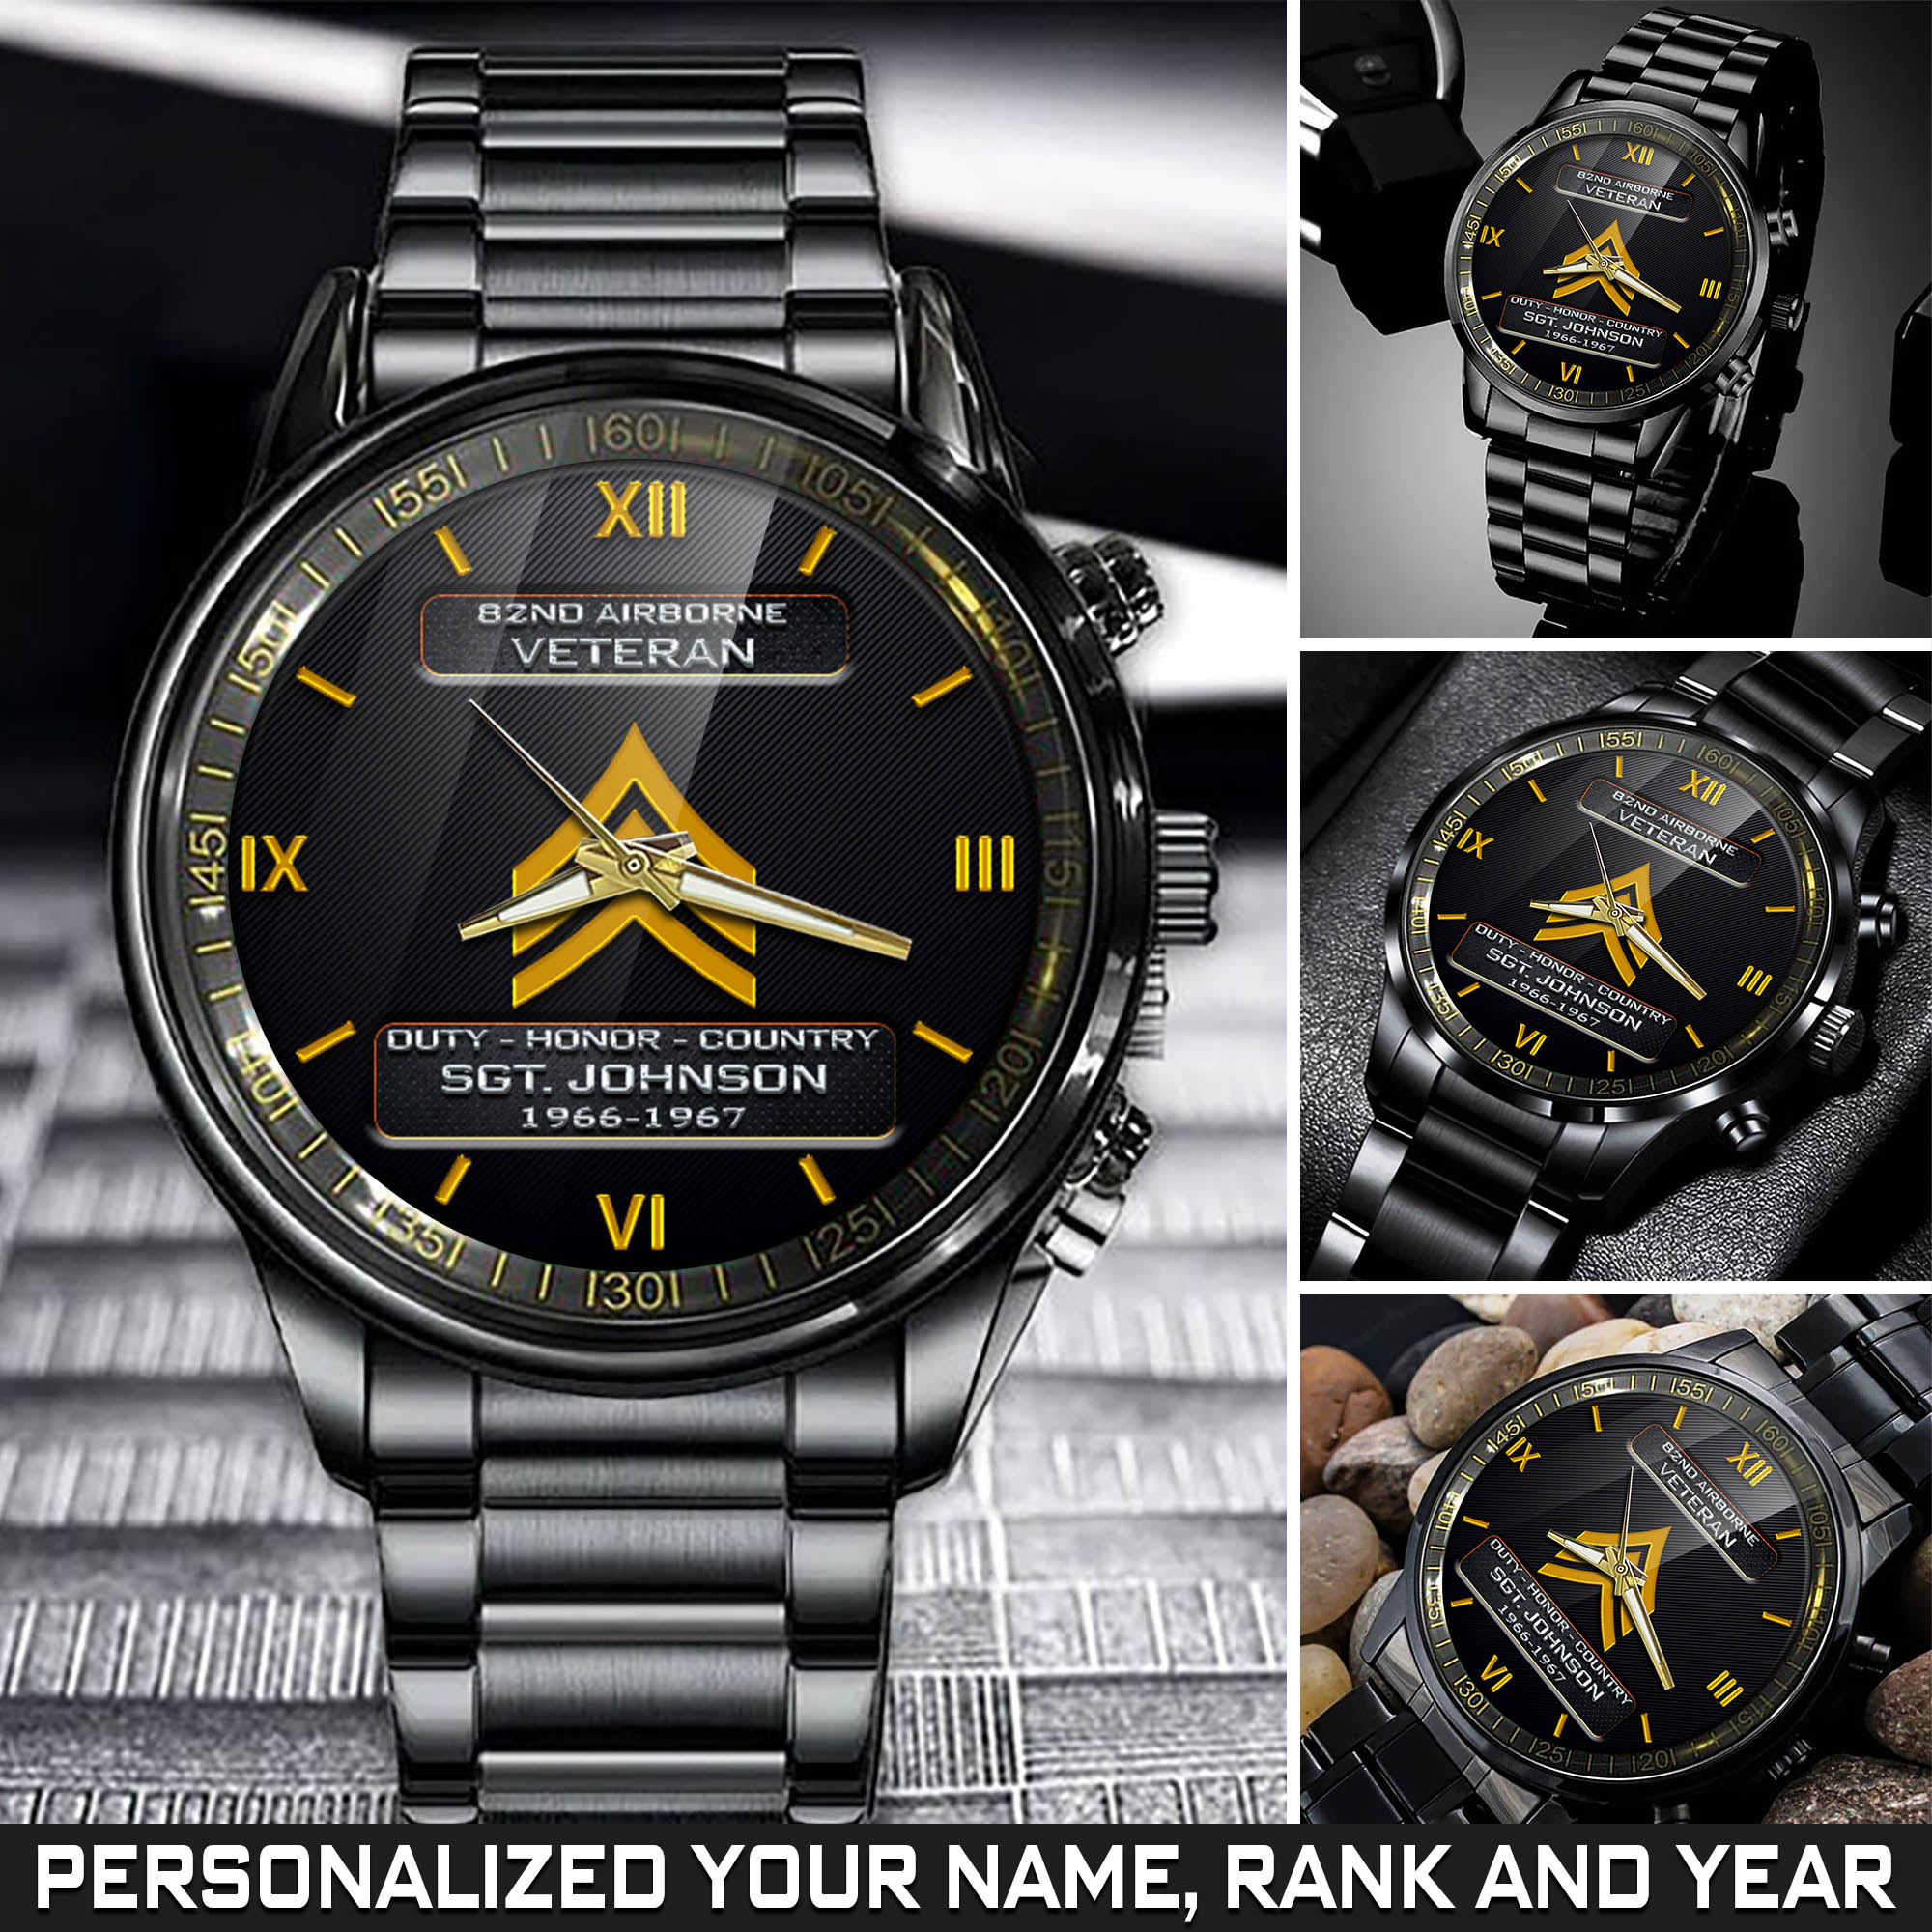 Personalized 82nd Airborne Veteran Black Fashion Watch With Your Name, Year And Rank, Military Watch For Veterans, Gift For Veterans ETHY-57684